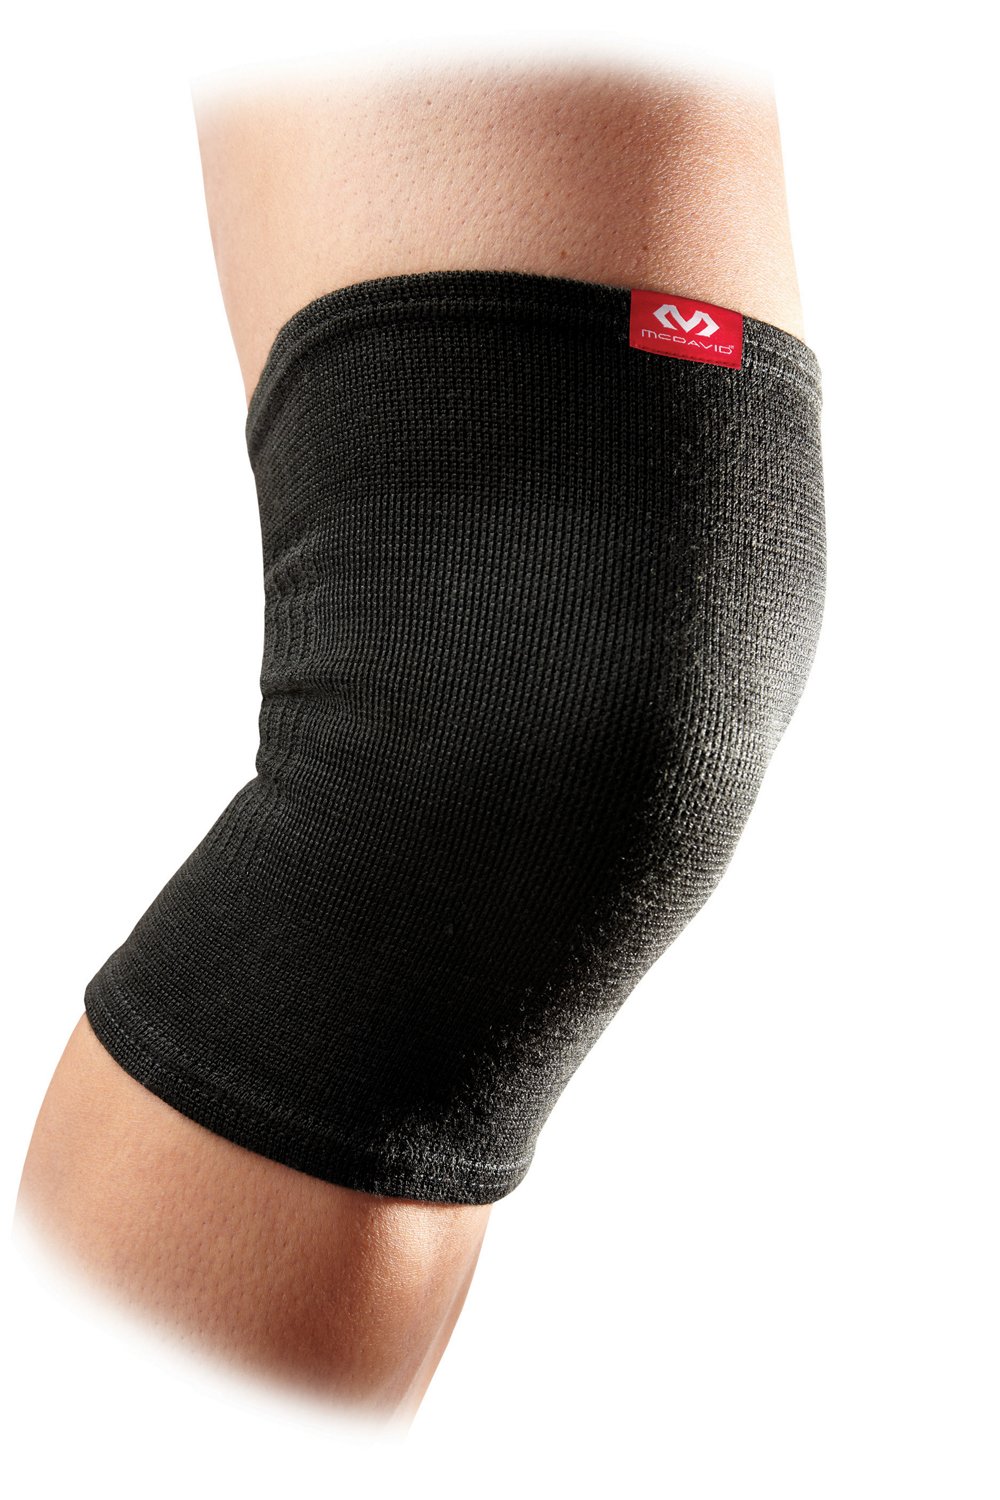 Houston Rockets Compression Knee Support